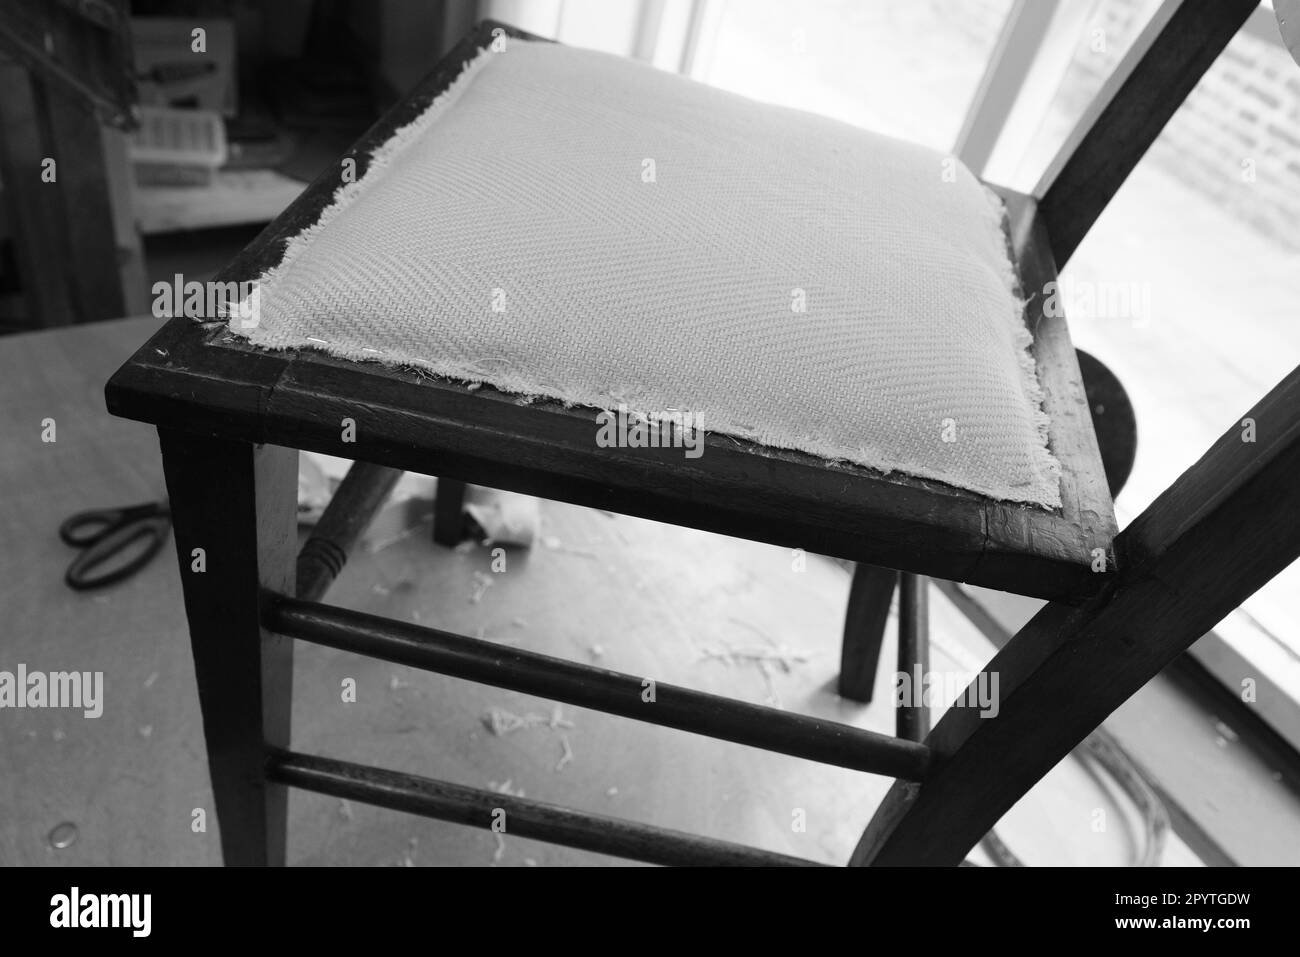 The stages involved in reupholstering a simple dining chair. Black and white images. Stock Photo